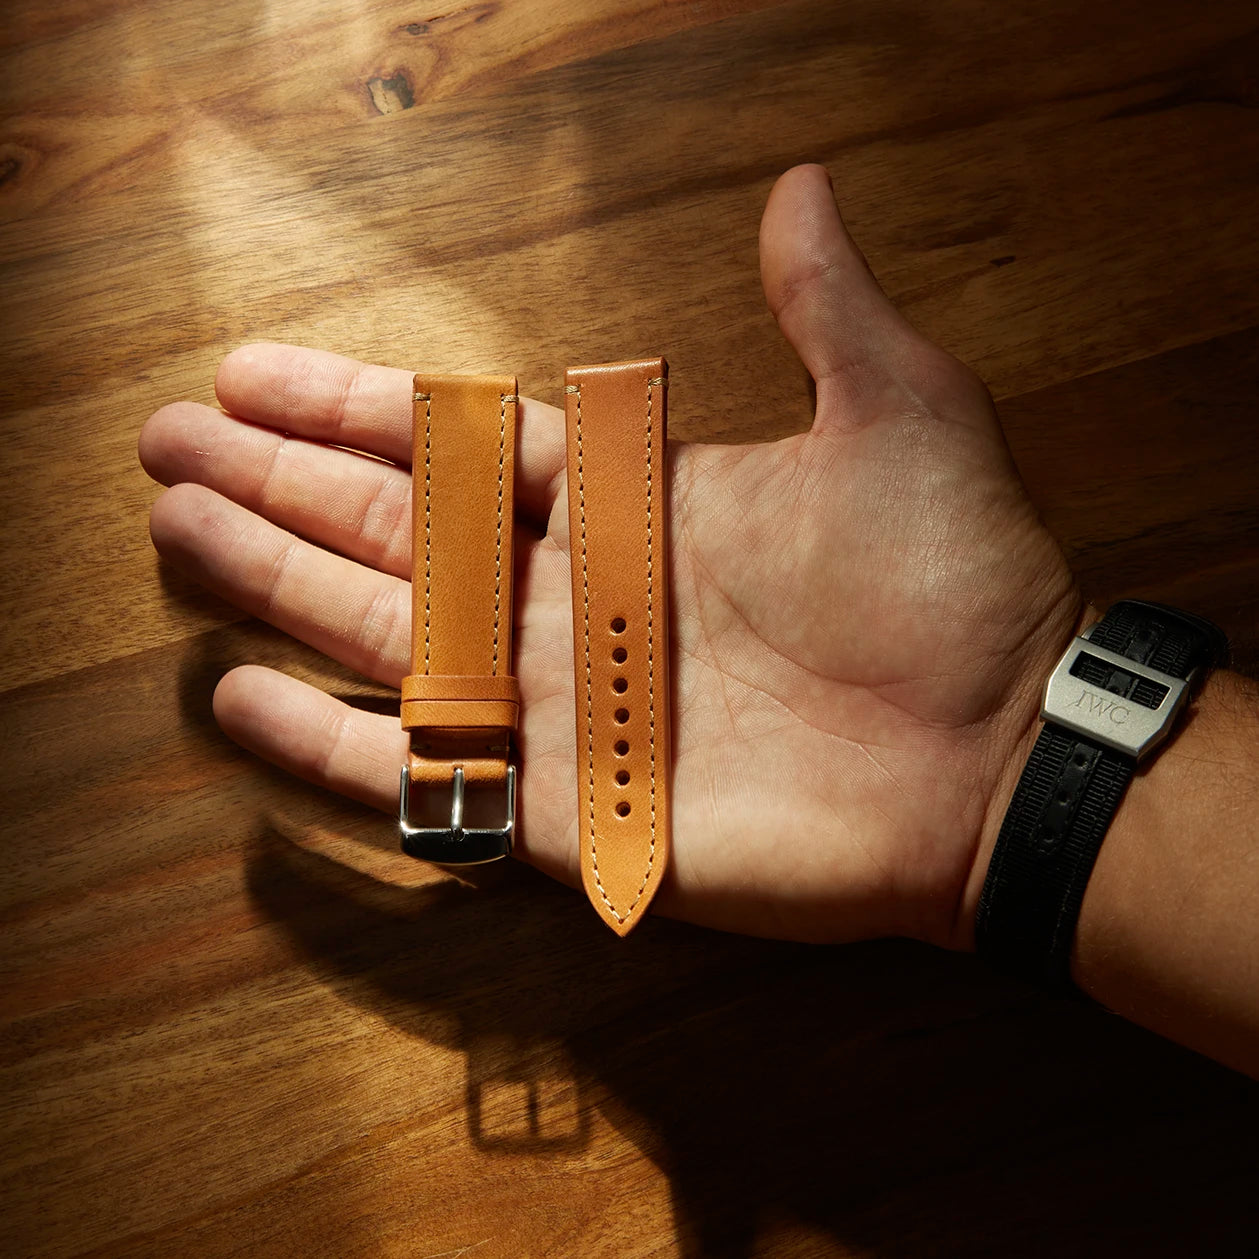 Leather iWatch Strap in Roasted